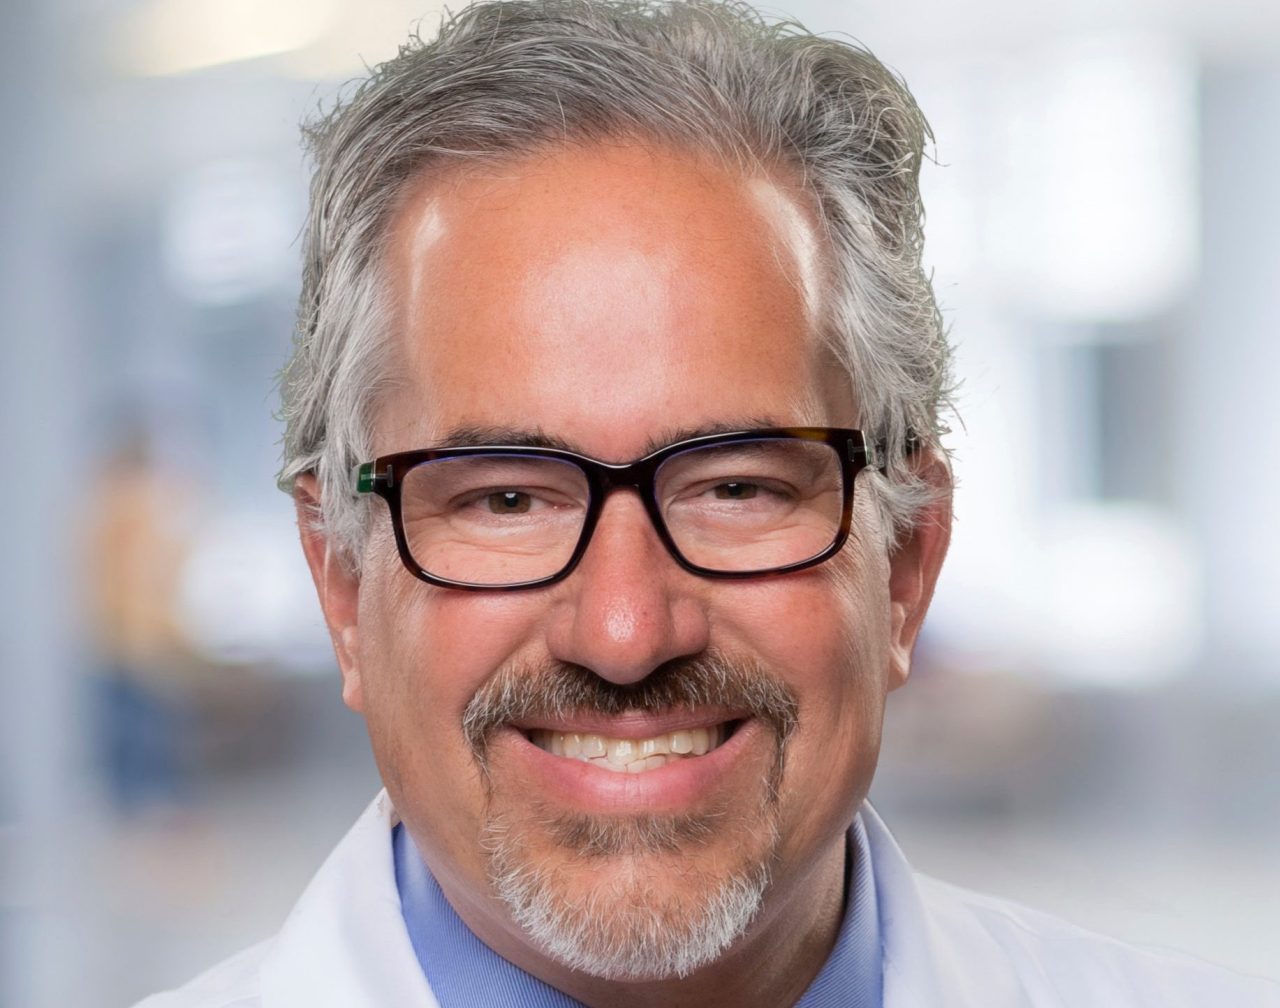 Ruben Mesa: Glad to have the opportunity to discuss the FDA approval of momelotinib for patients with myelofibrosis in this interview with Pharmacy Times!